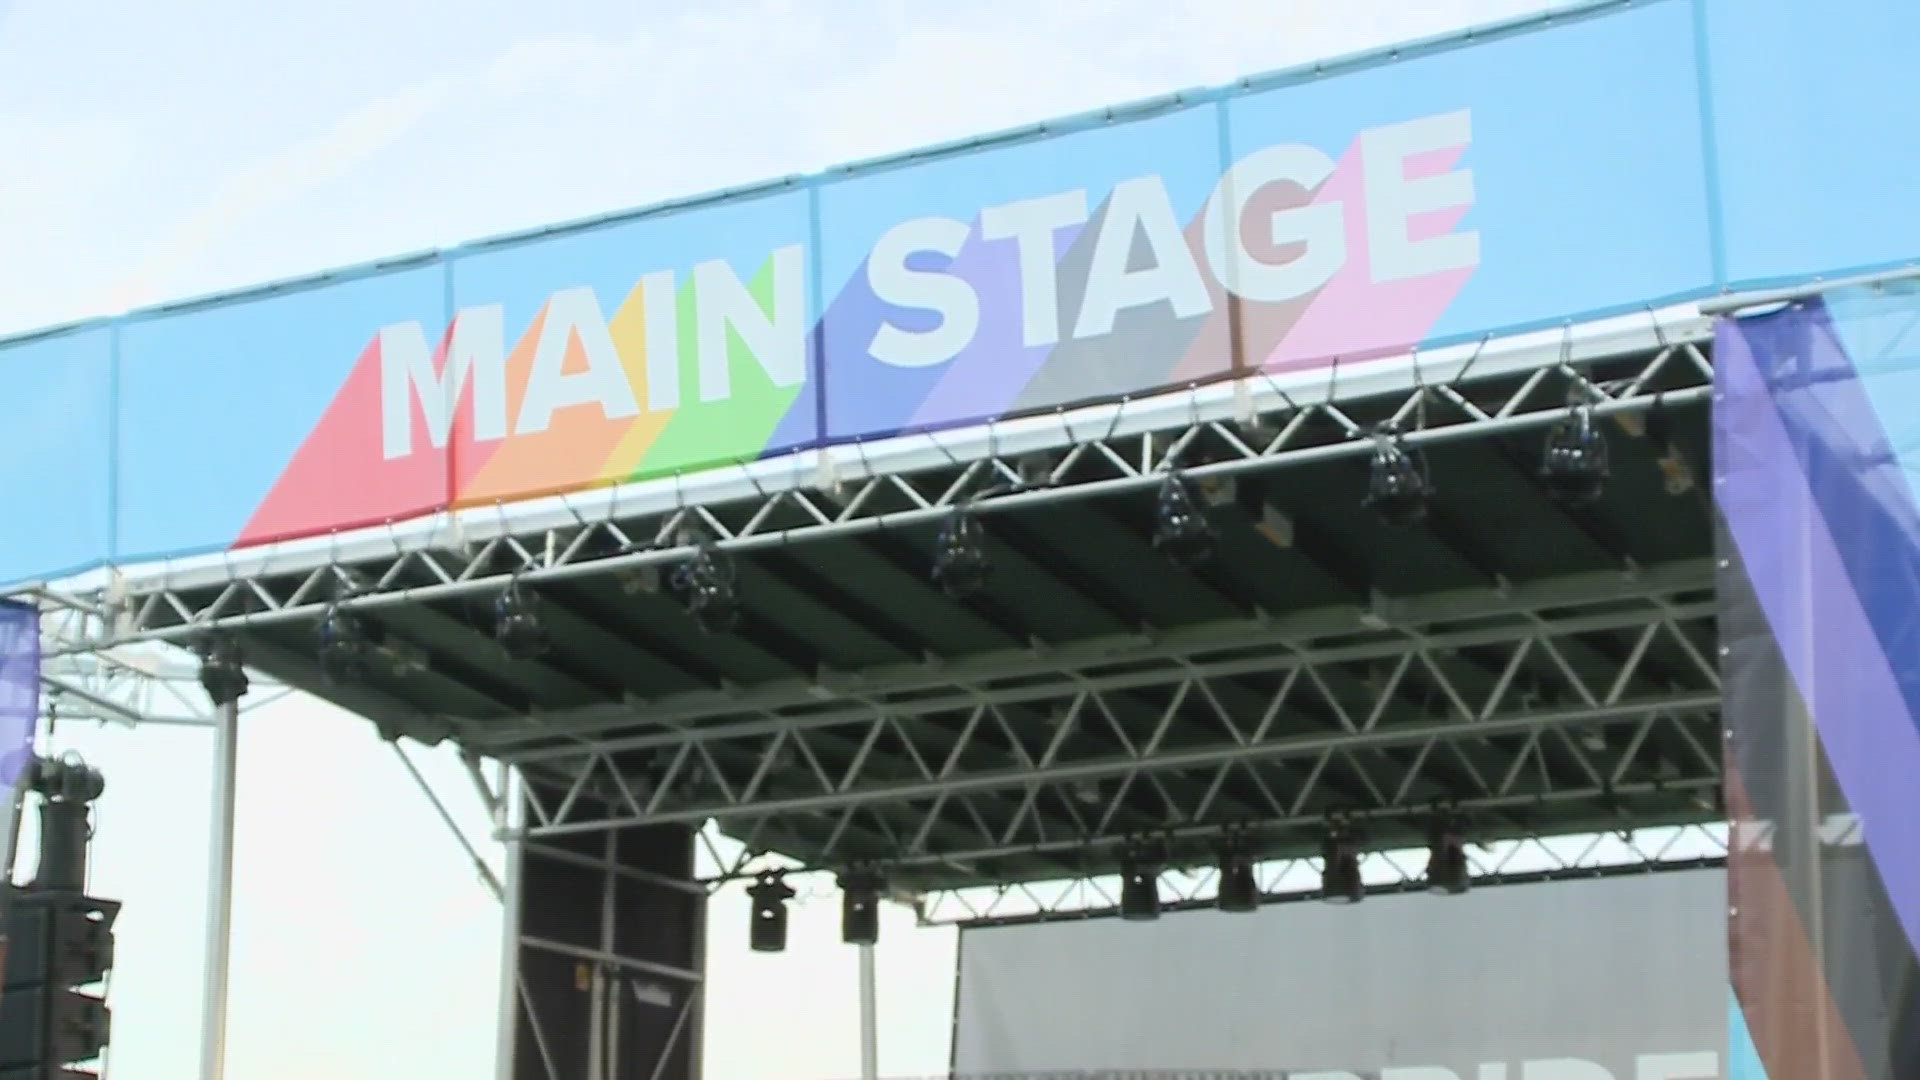 On Saturday, June 3, Pride in the CLE is returning to downtown.